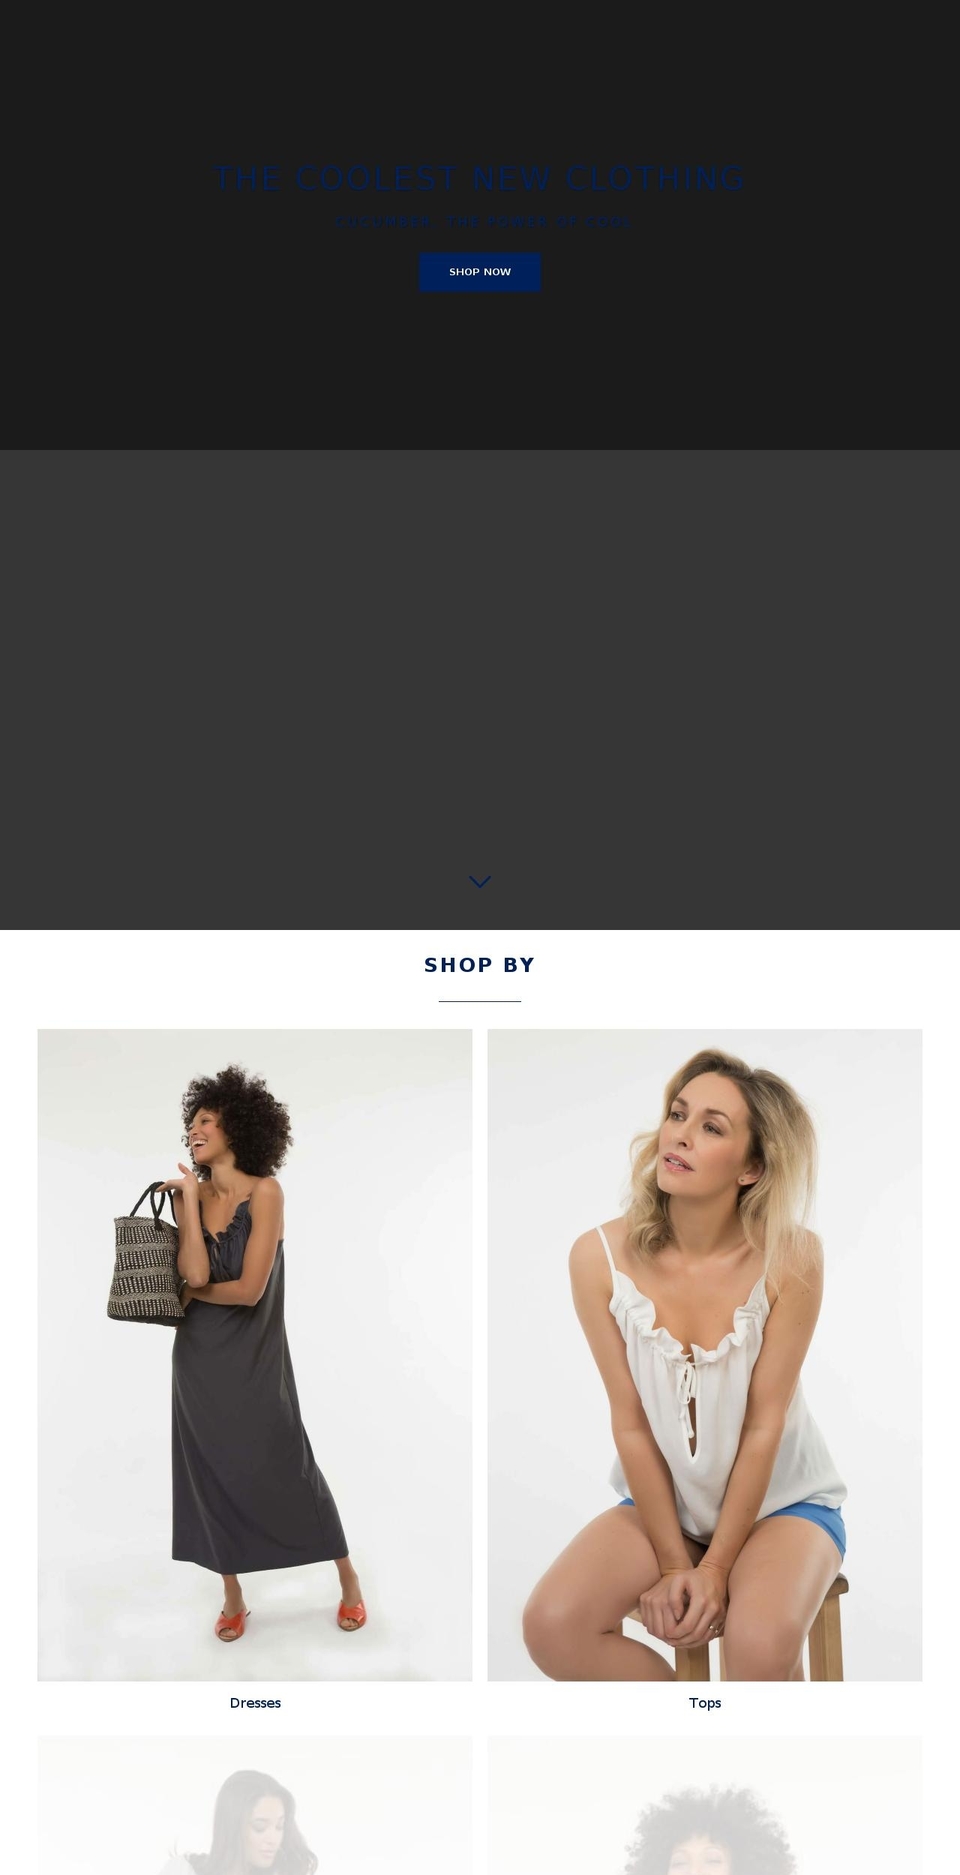 Wholesale Shopify theme site example cucumberclothing.com